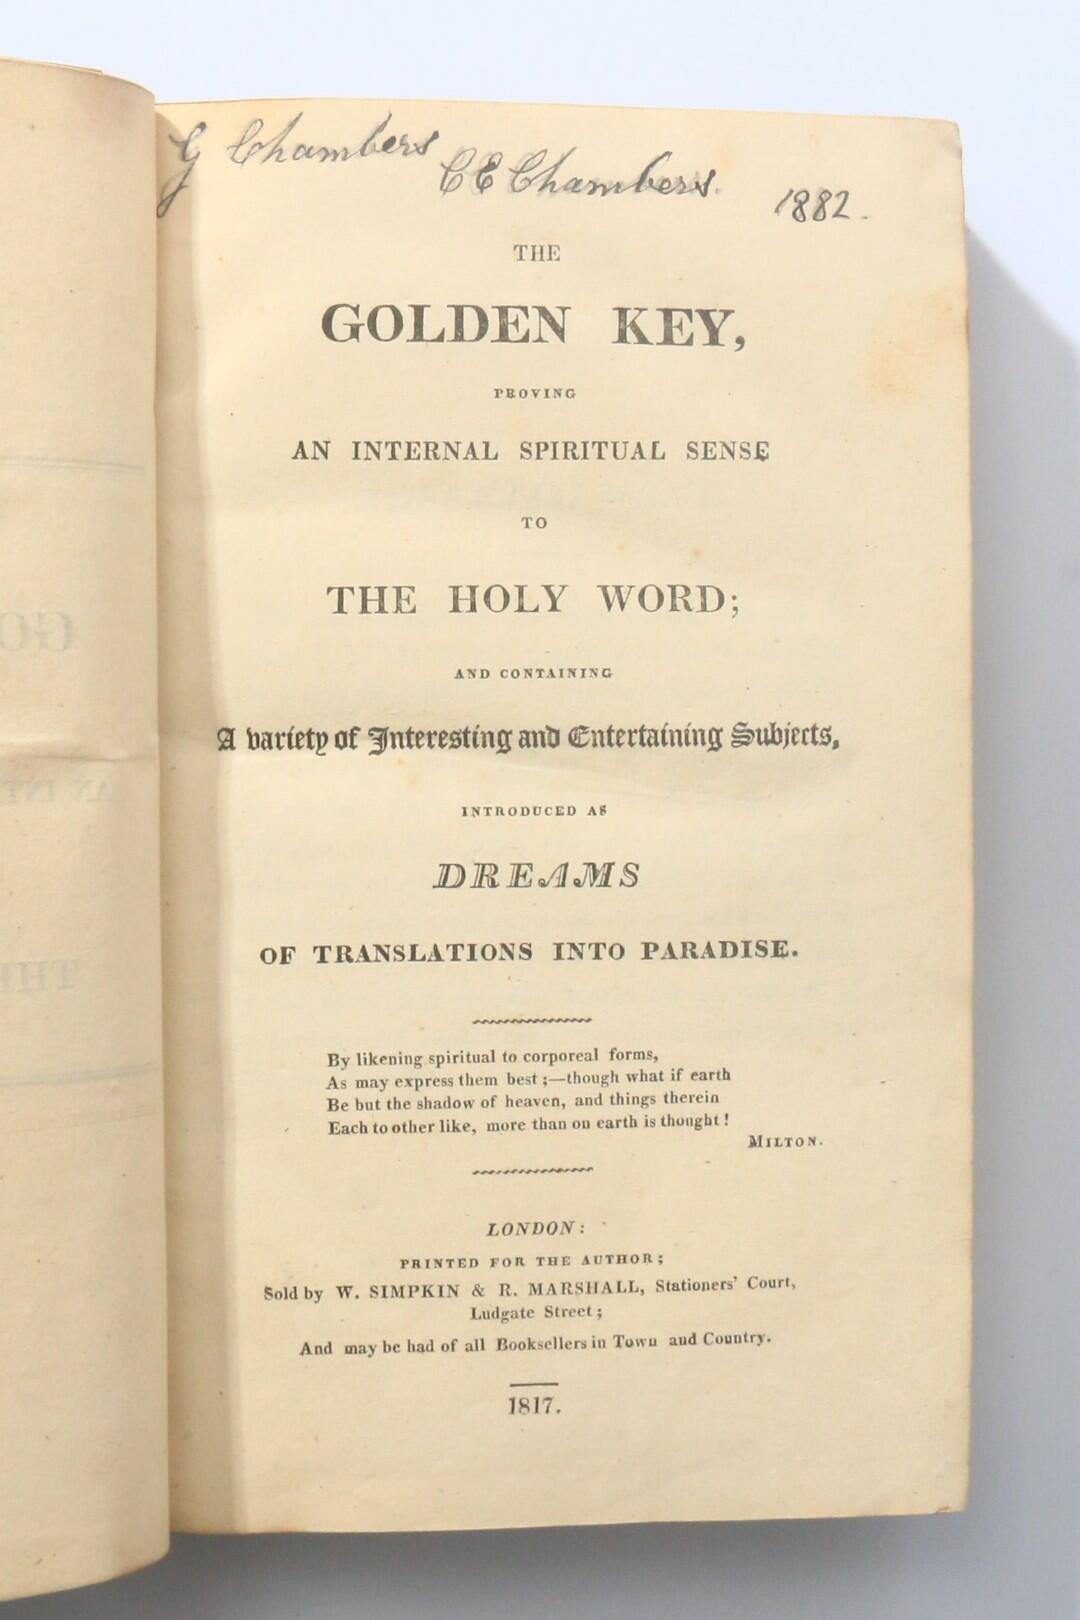 Anonymous - The Golden Key, Proving an Internal Spiritual Sense to the Holy Word; and Containing a Variety of Interesting and Entertaining Subjects, Introduced as Dreams of Translations Into Paradise - W. Simpkin & R. Marshall, 1817, First Edition.